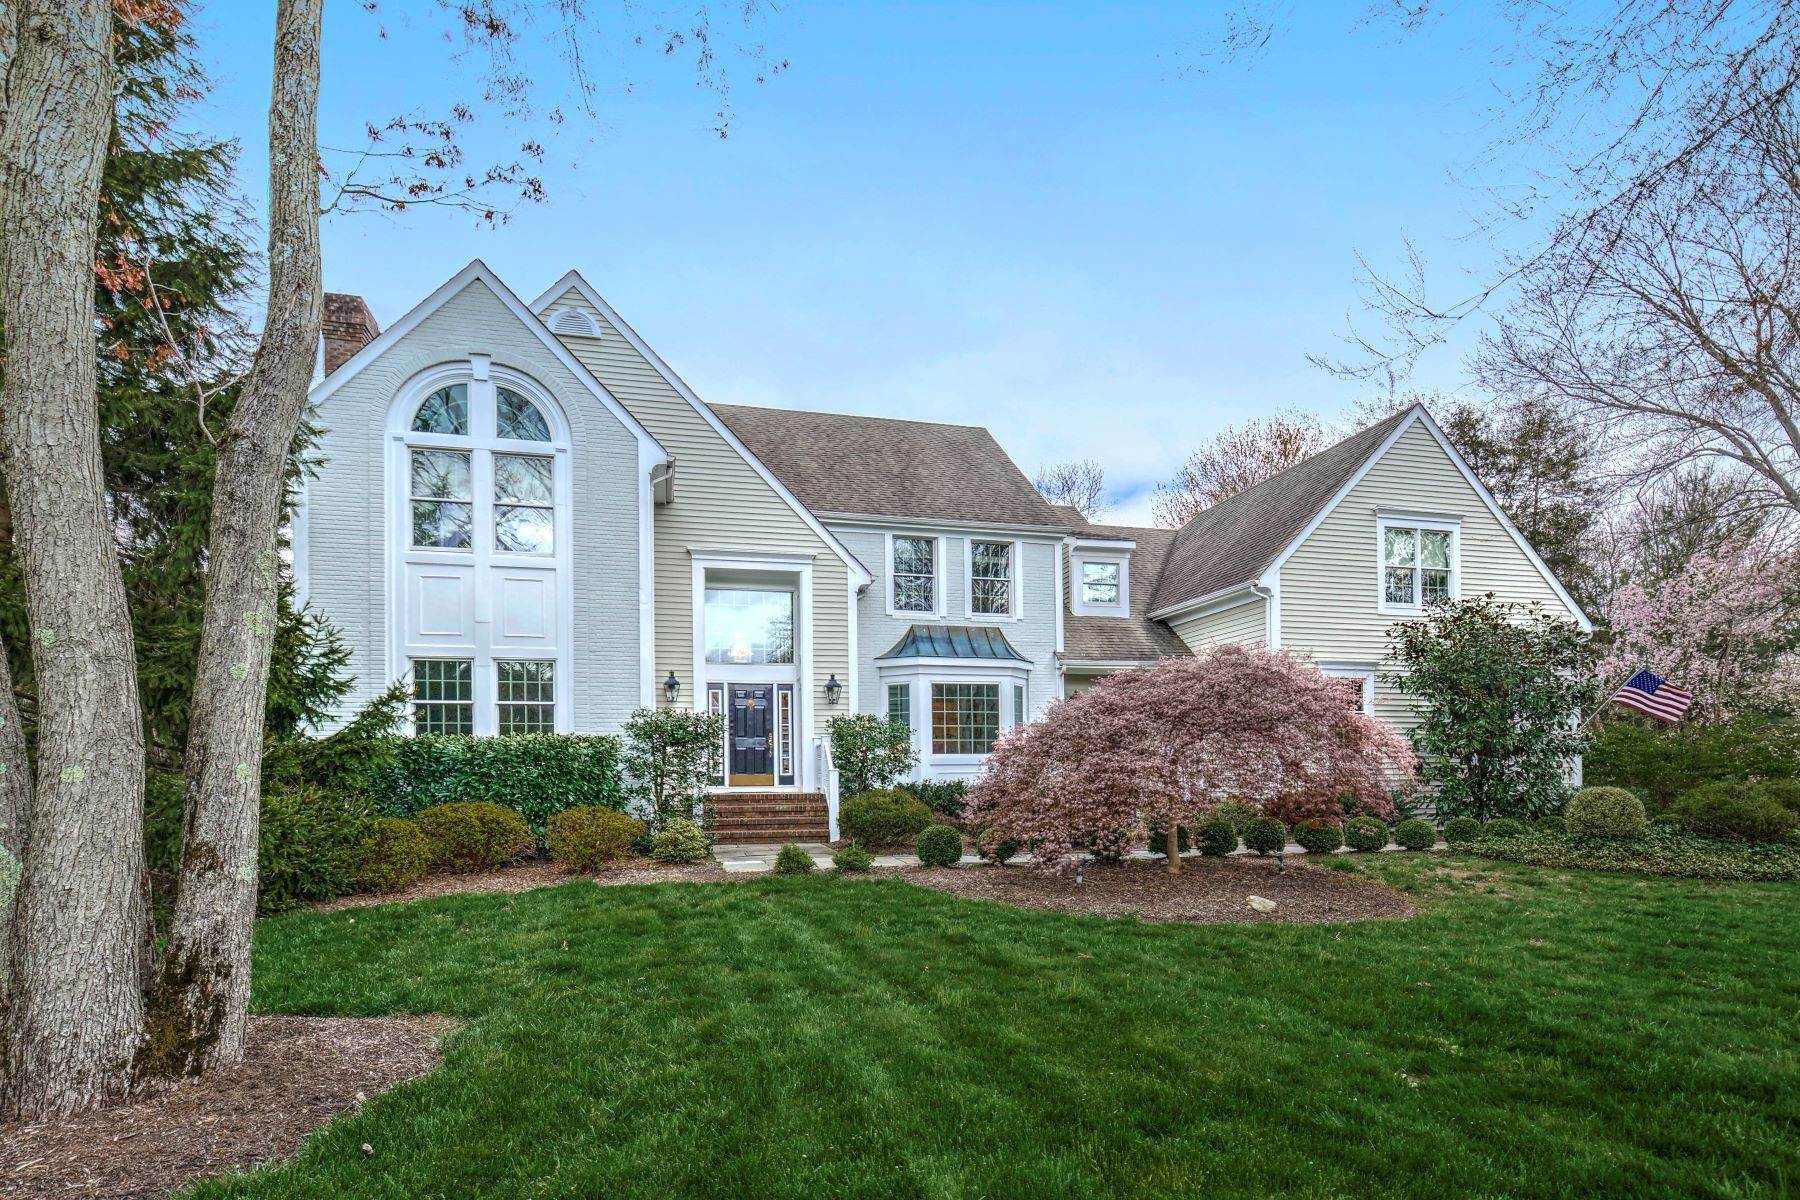 Property for Sale at Highland Woods Custom Colonial 76 South Stone Hedge Drive Basking Ridge, New Jersey 07920 United States